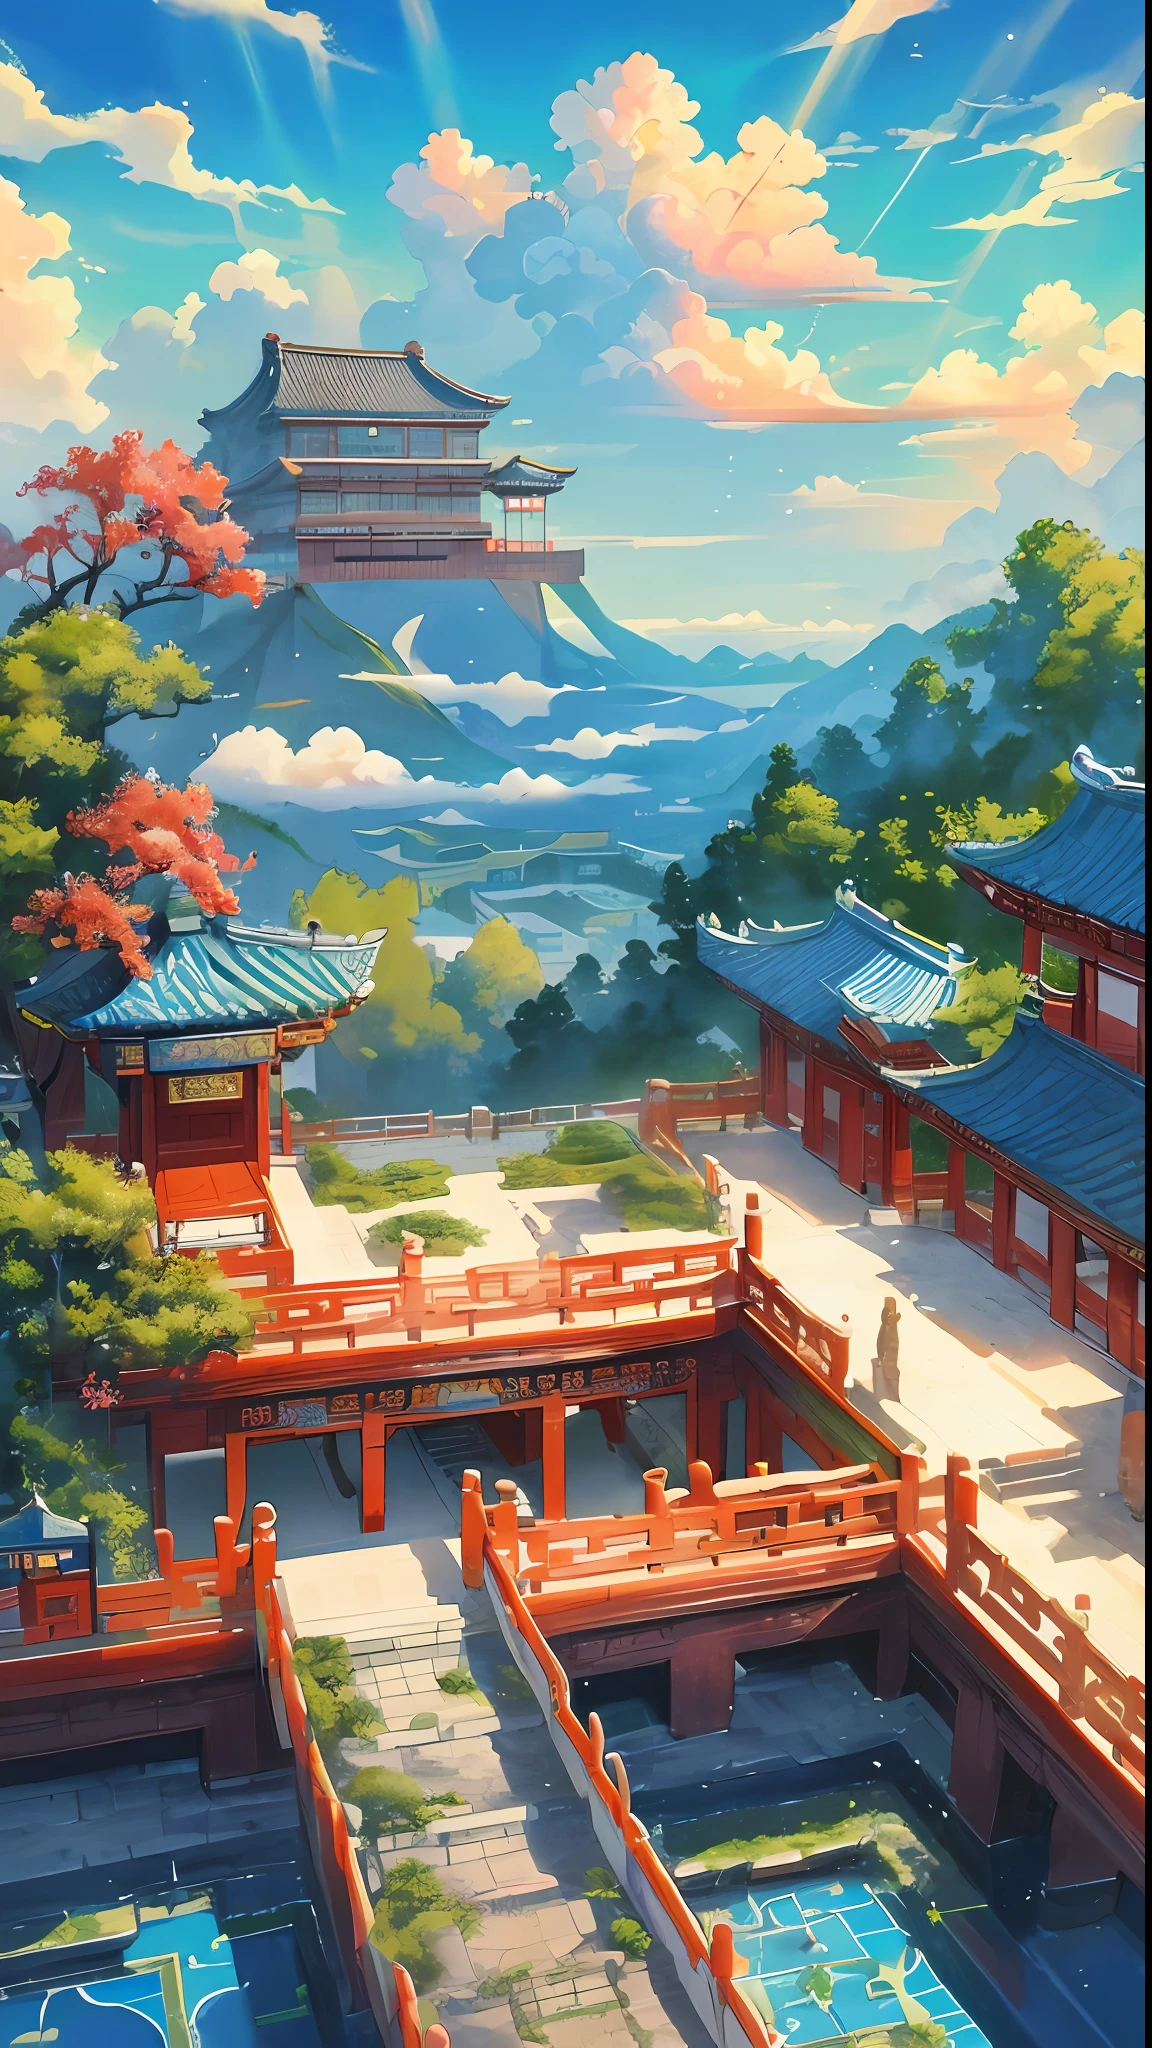 The game scene, the ancient Chinese palace is located above the clouds, surrounded by clouds and mist, majestic, glazed tiles, colorful rays of light, ((color ink)),((splash ink)),((splash ink) ink}) ), masterpiece, high quality, Refined graphics, high detail